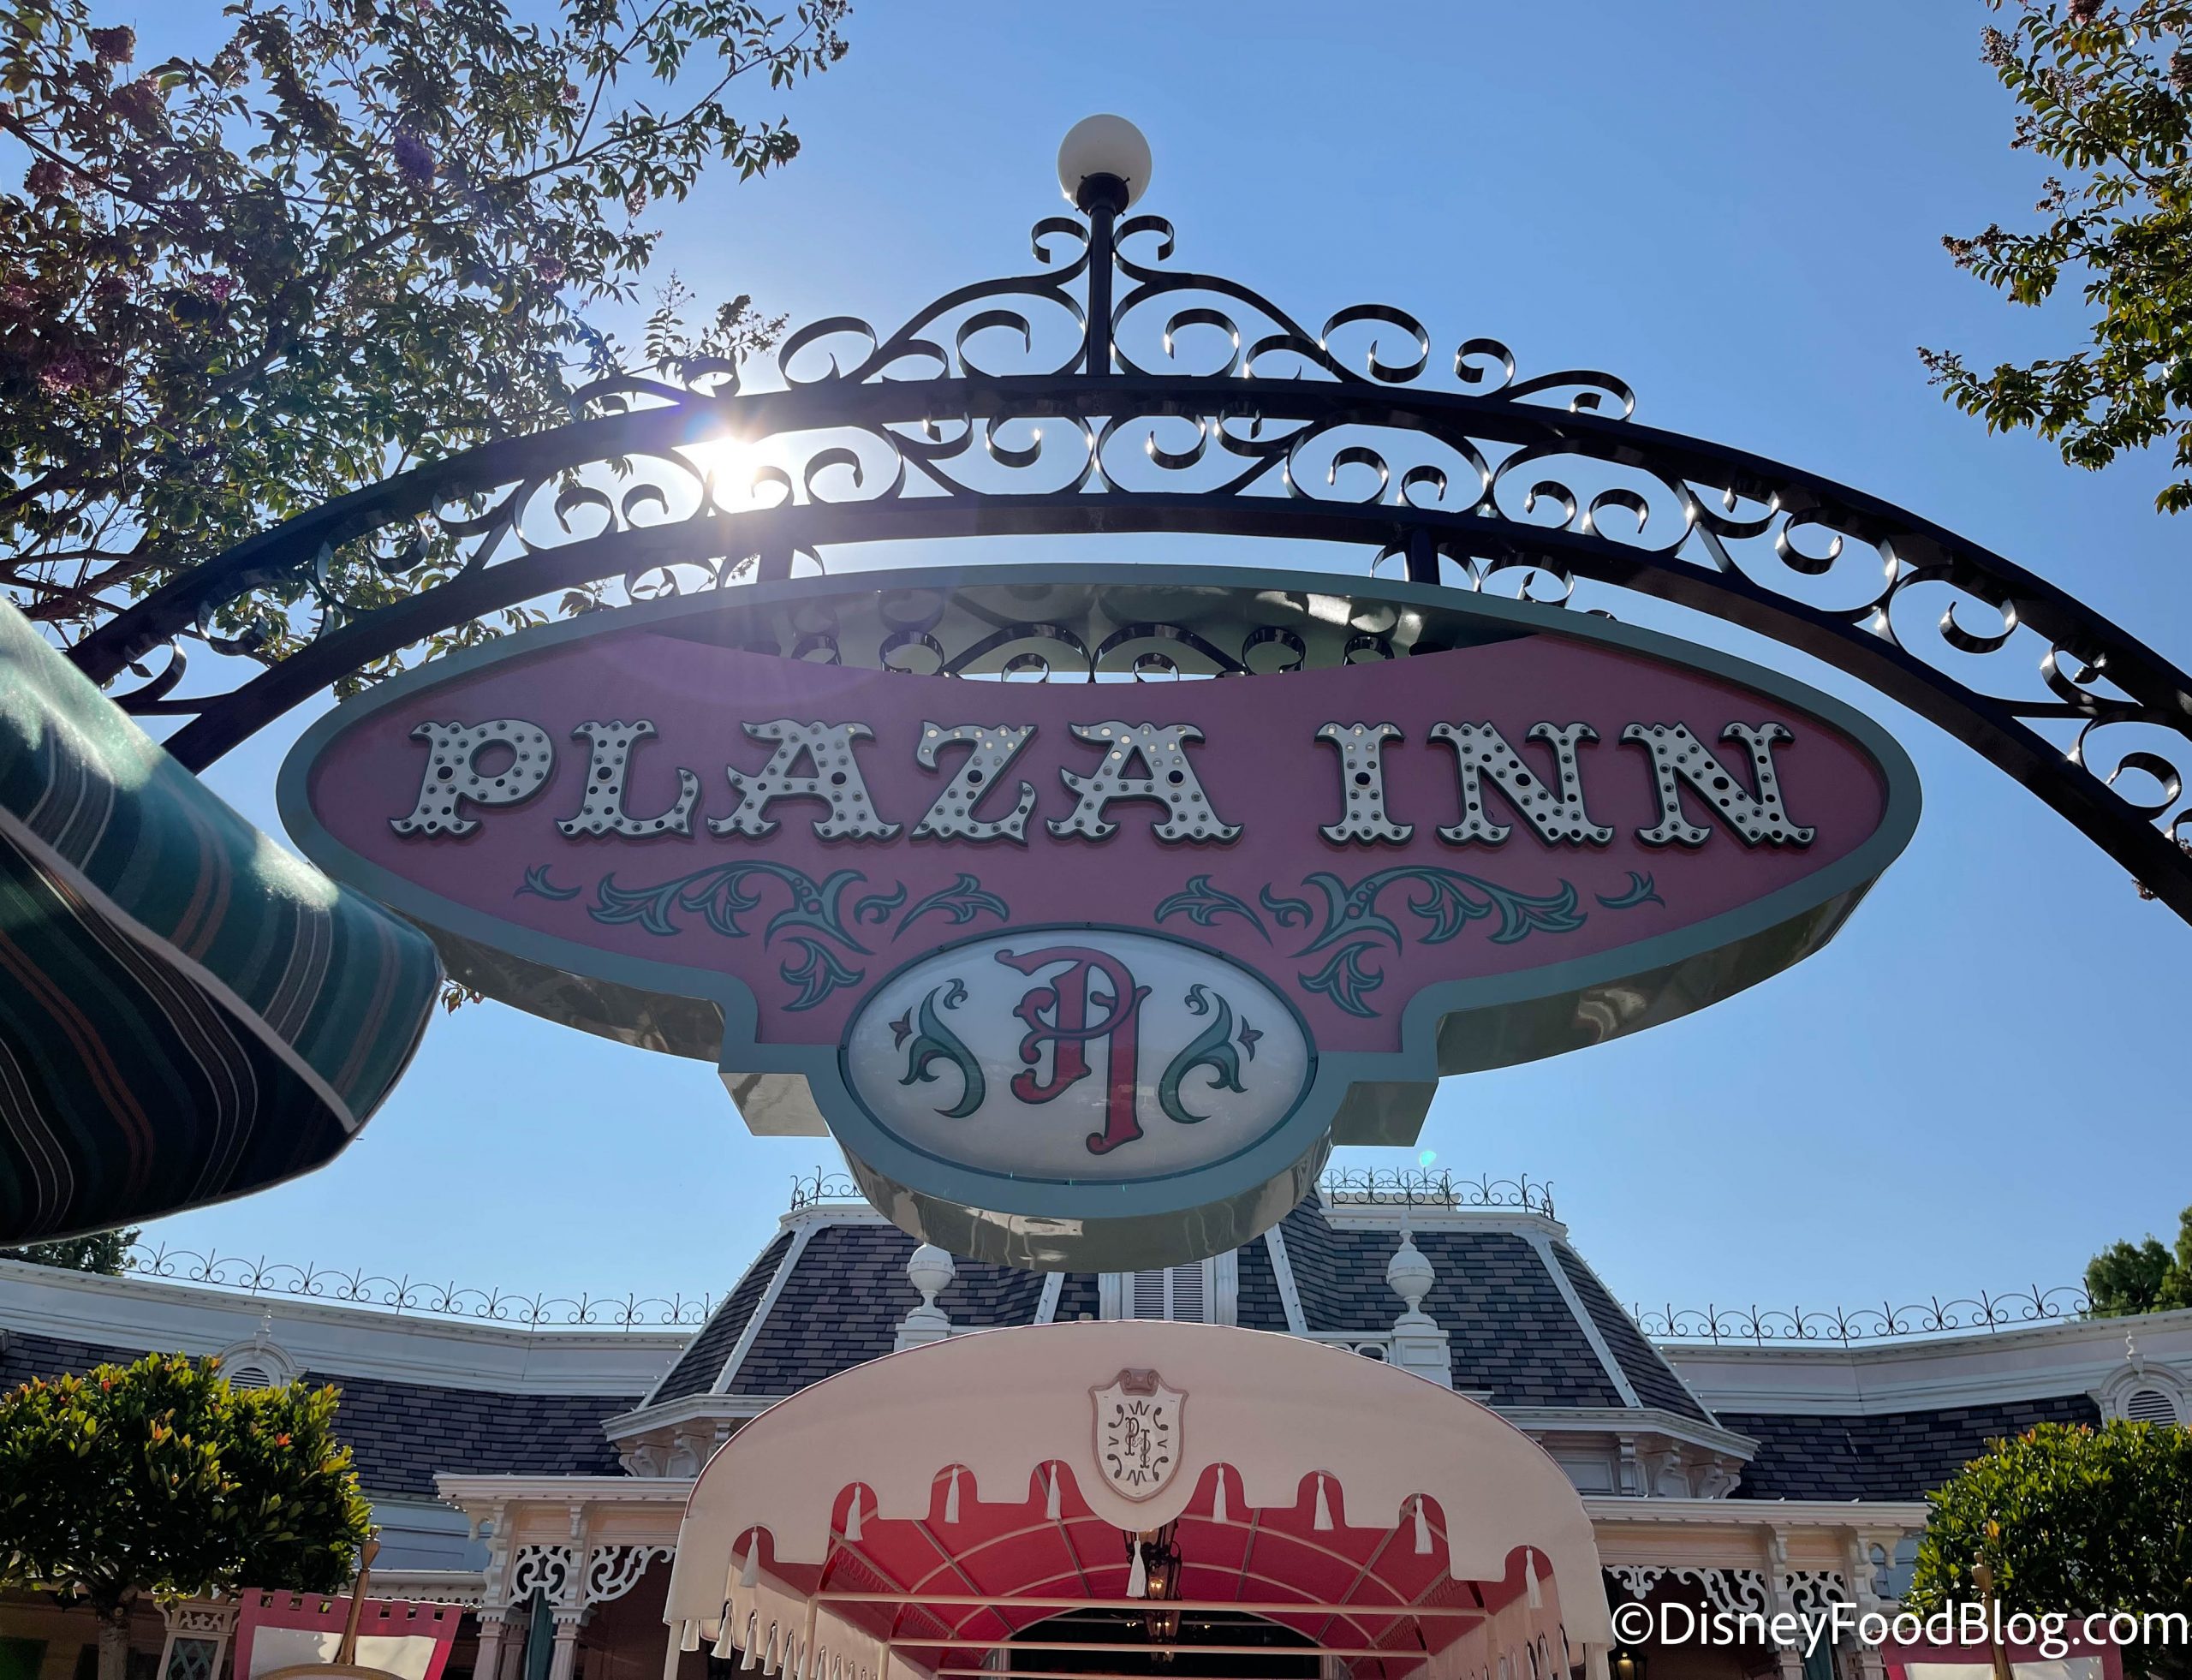 FIRST LOOK at a Reopened Plaza Inn Character Breakfast in Disneyland